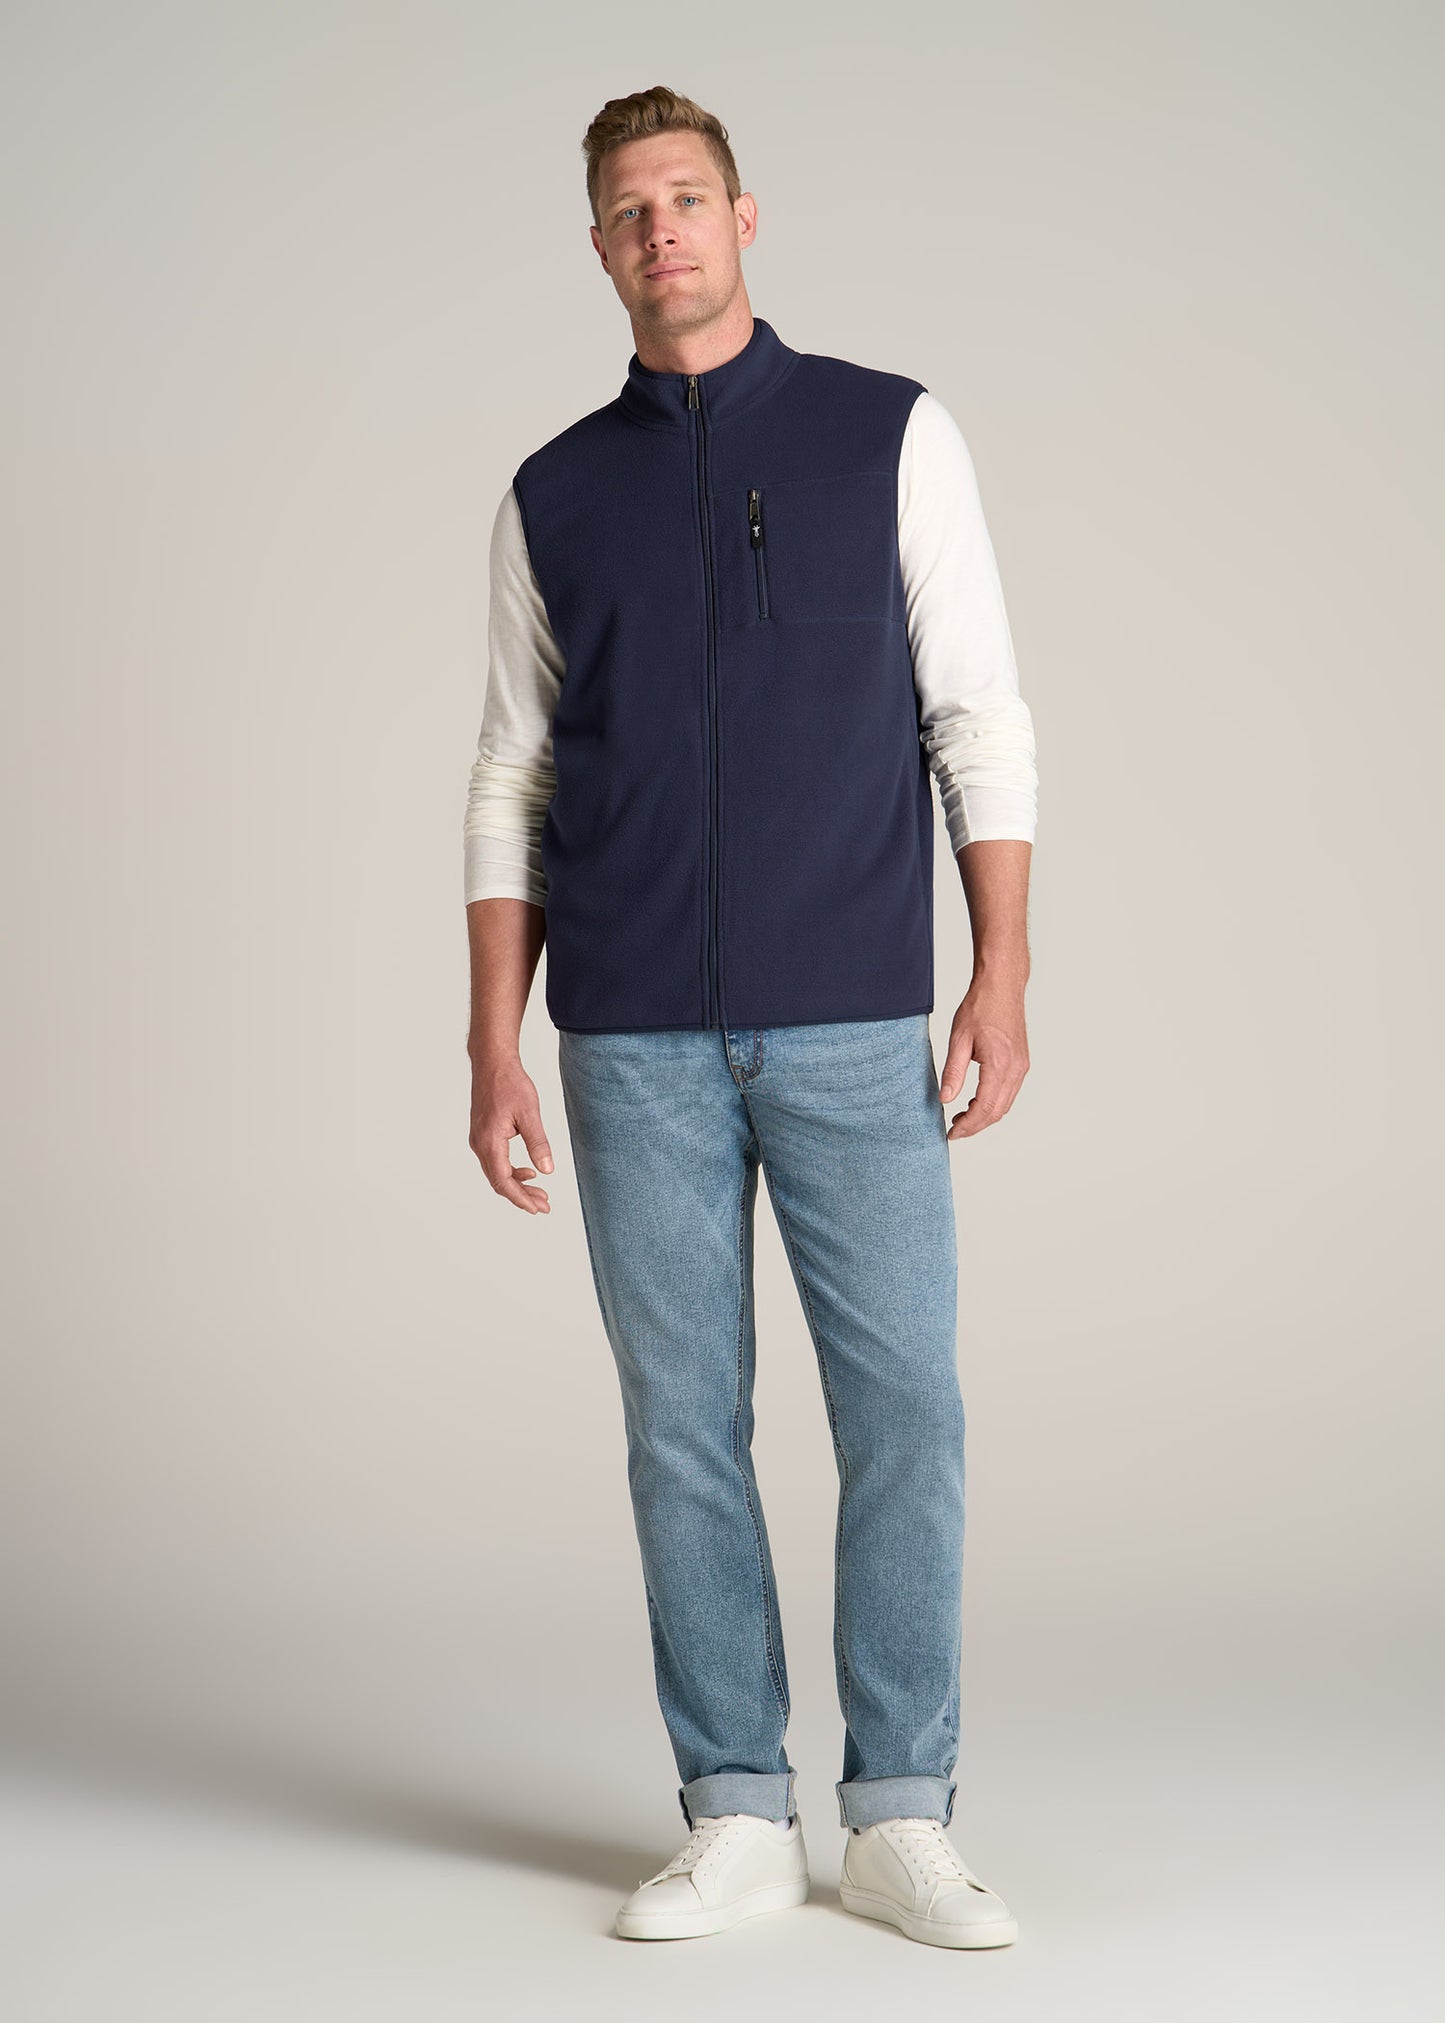 A tall man wearing American Tall's Polar Fleece Sweater Full Zip Vest for Tall Men in Regal Blue, their Slub Long Sleeve Scoop Tall Men's Tee in Ecru and Carman Tapered Jeans for Tall Men in Vintage Faded Blue.